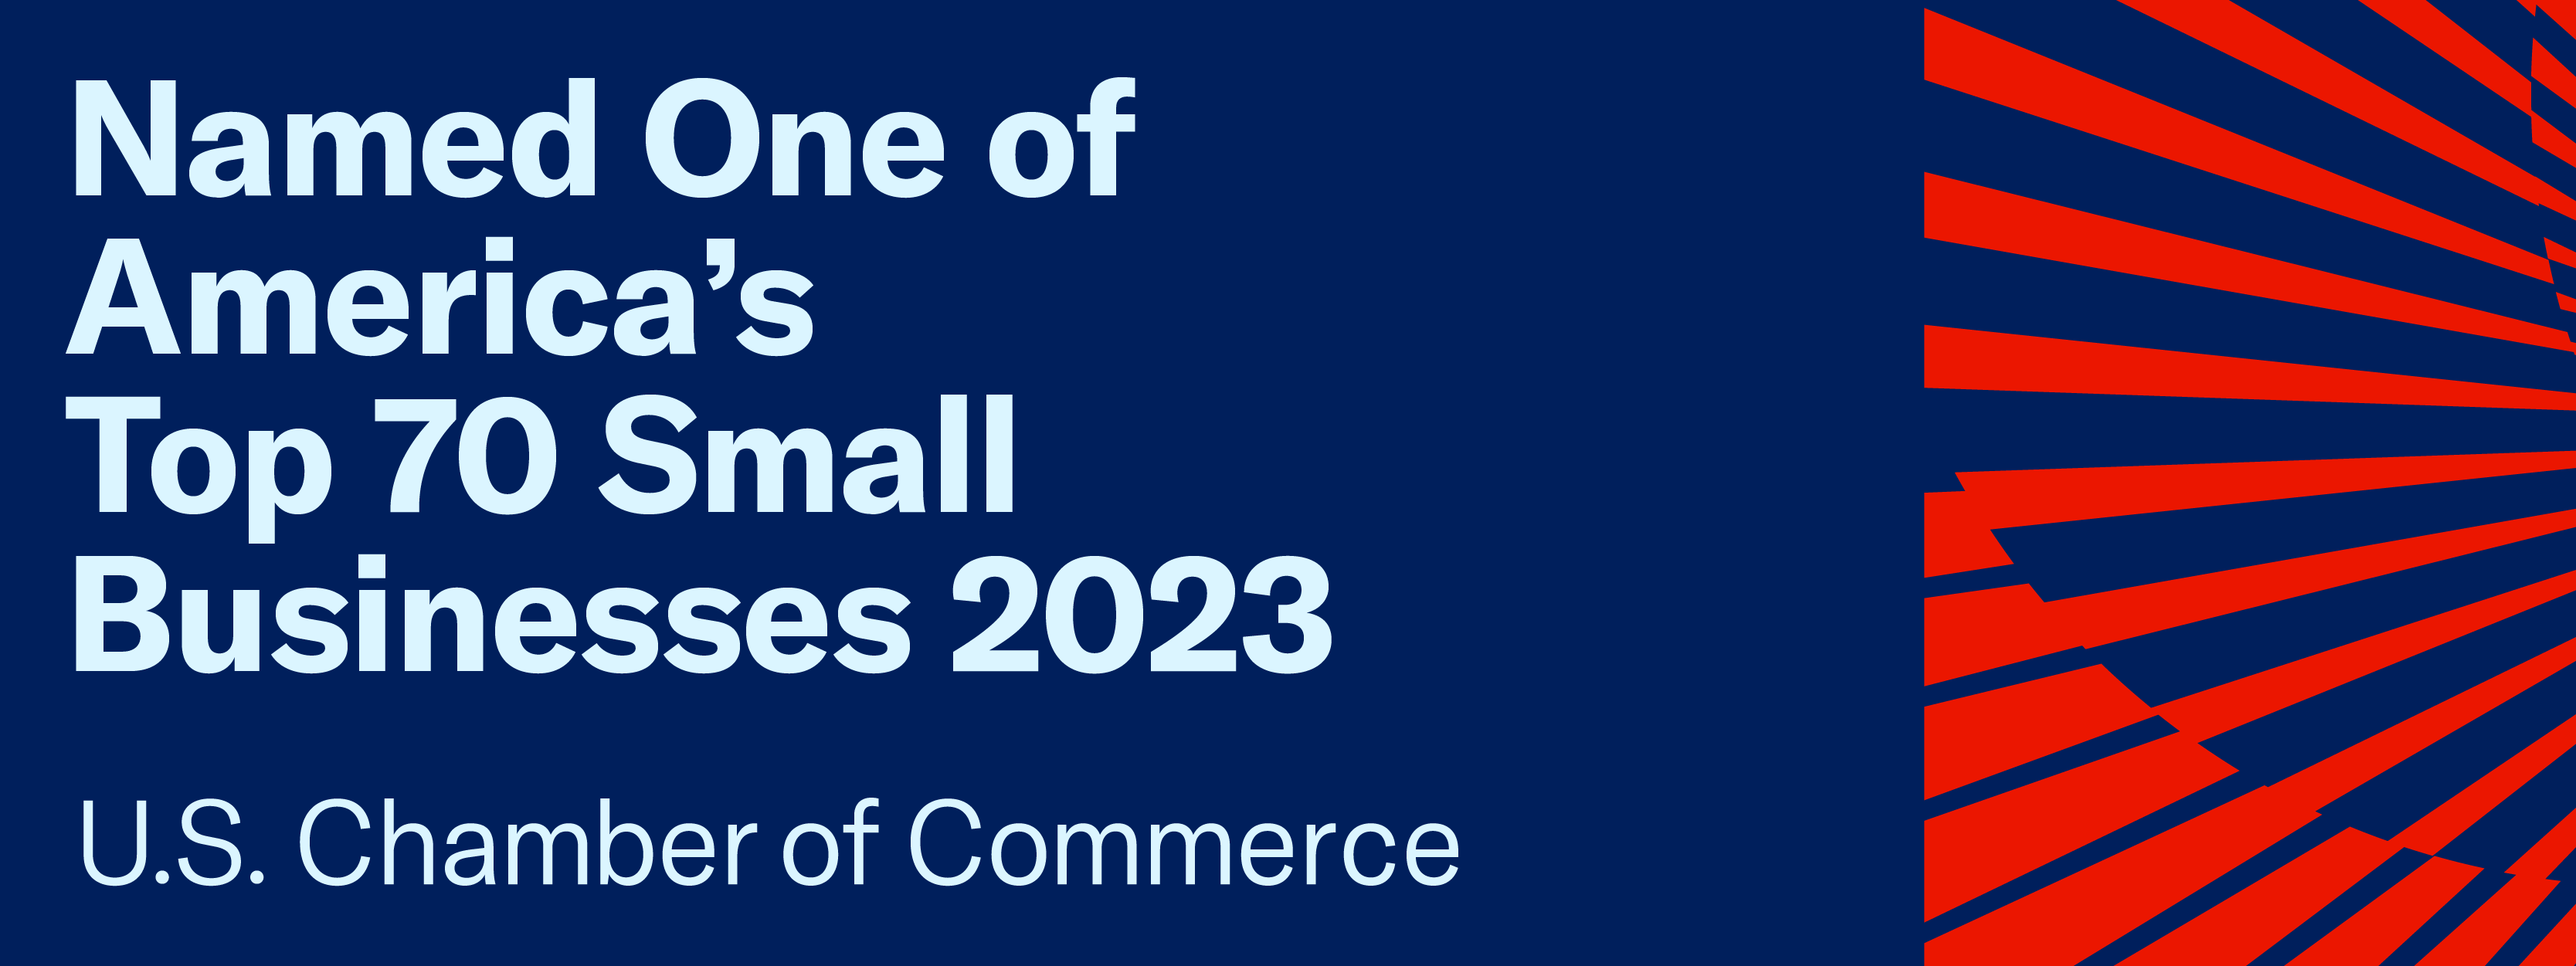 US Chamber of Commerce: America's Top Small Business 2023. DCSI Top 10 in Southeastern Region.